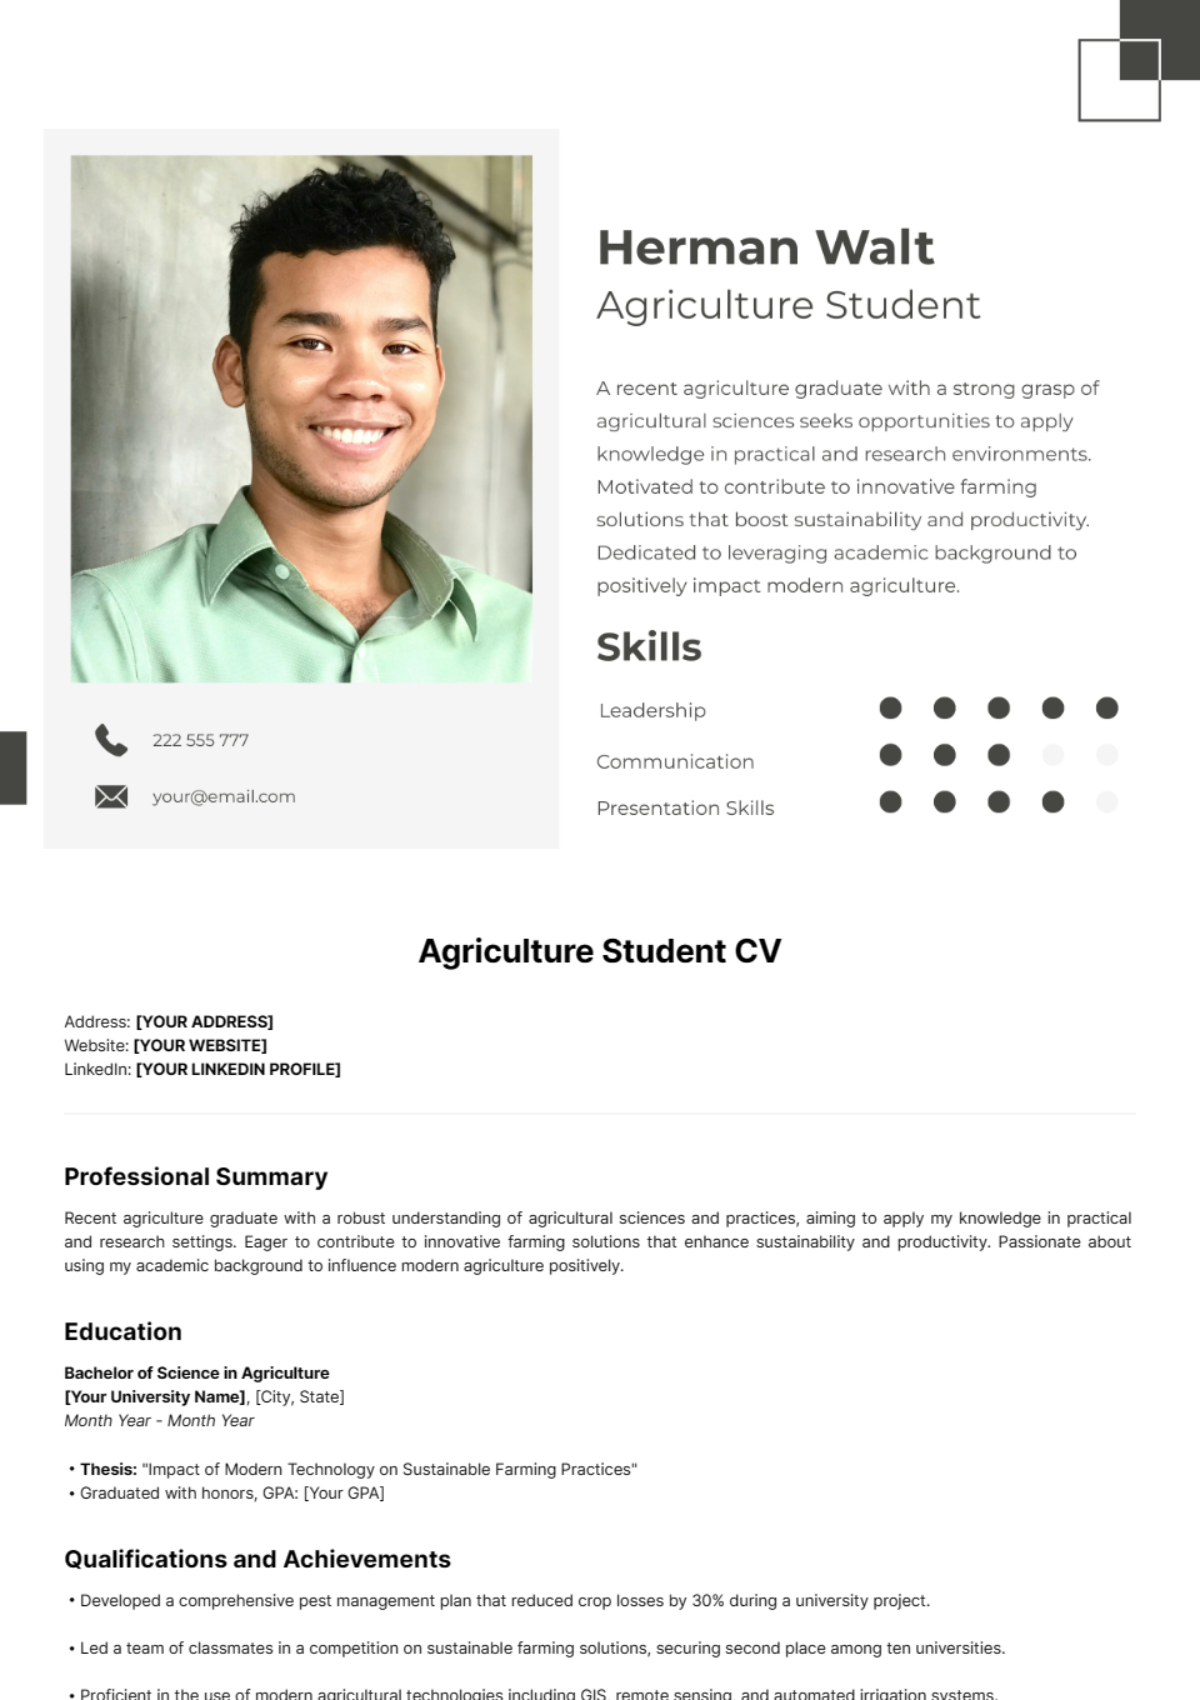 Free Agriculture Student CV Template